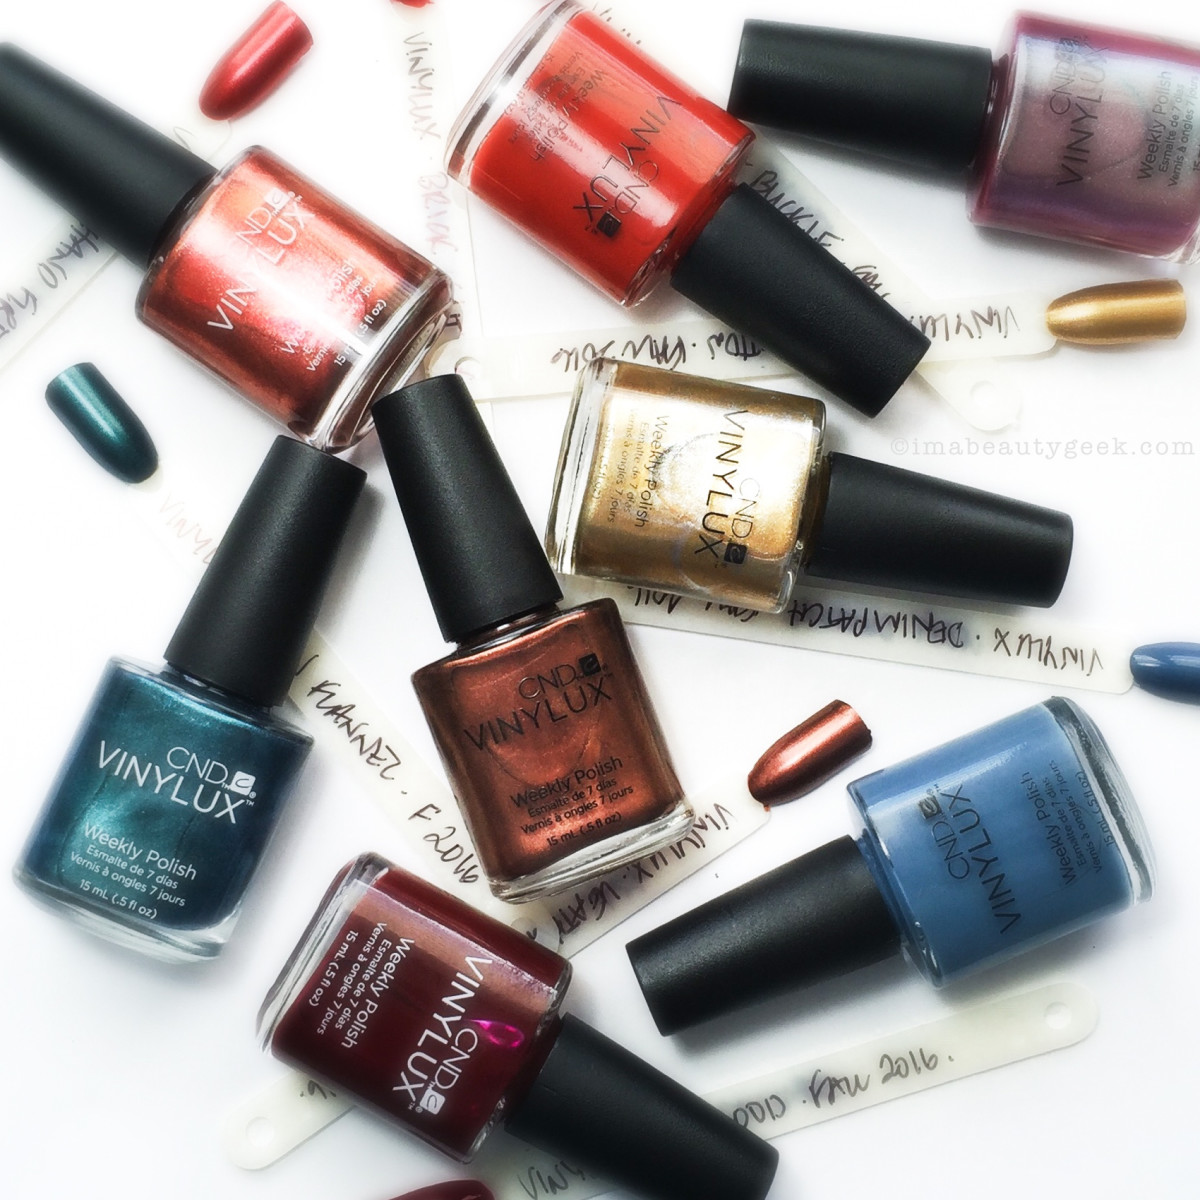 CND Vinylux Craft Culture Collection Swatches Review Fall 2016 - Version 2